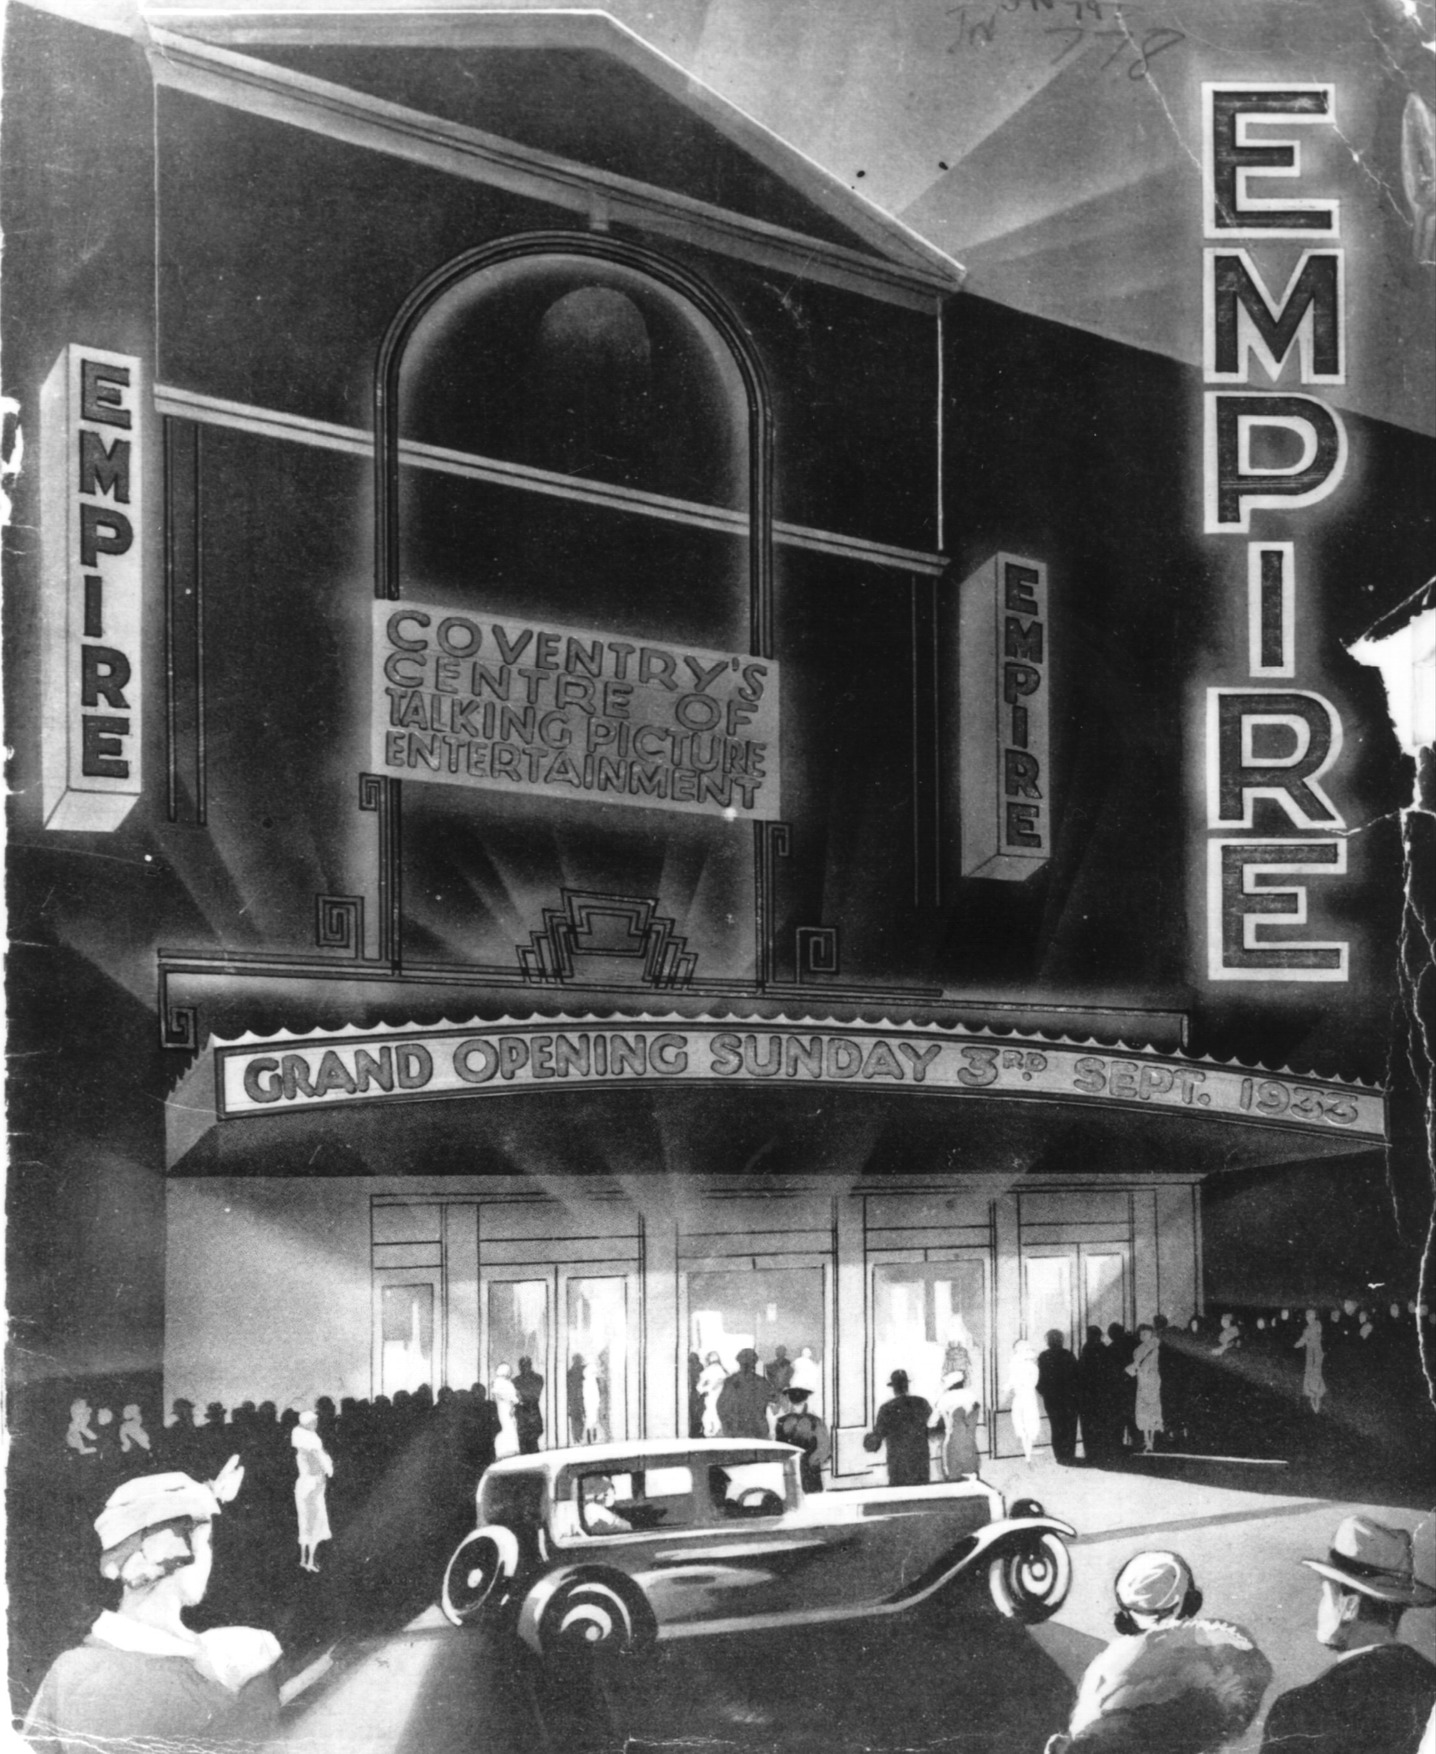 A poster celebrating the grand opening of the Empire on 3 September 1933, with a drawn design featuring glamorously dressed people arriving outside the building, and a car pulling up in front.